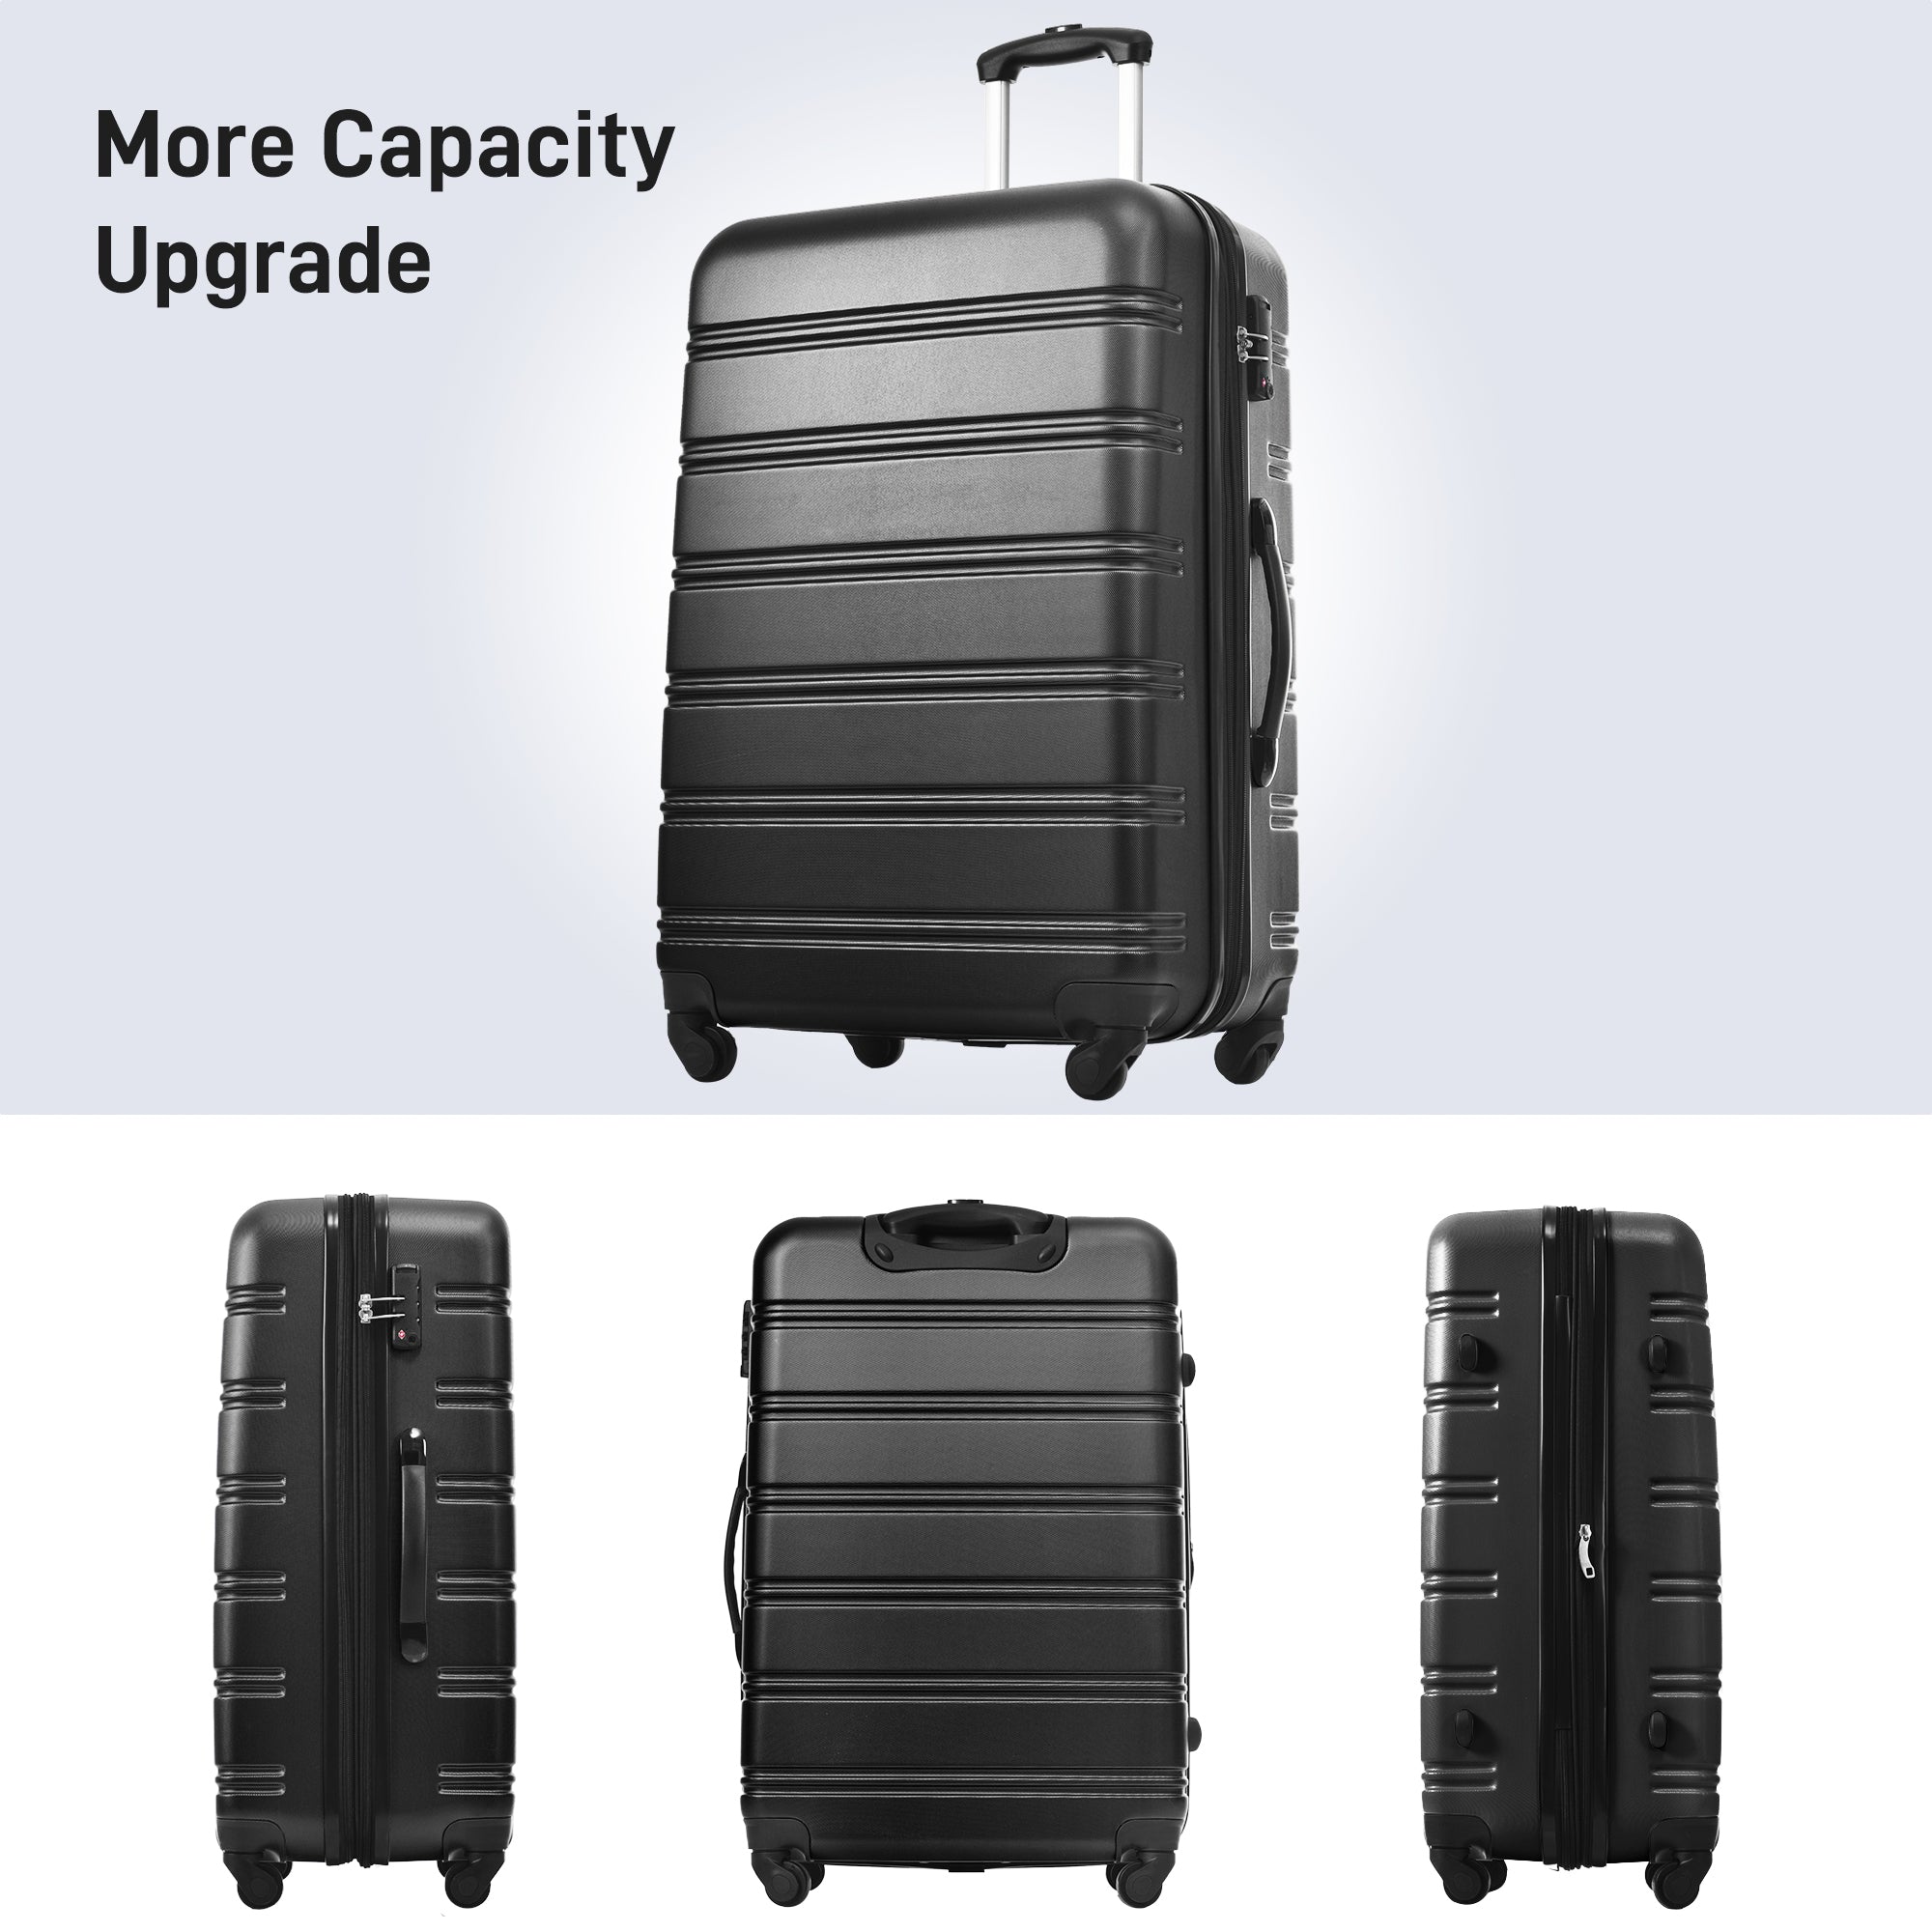 Luggage Sets of 2 Piece Carry on Suitcase Airline black-abs